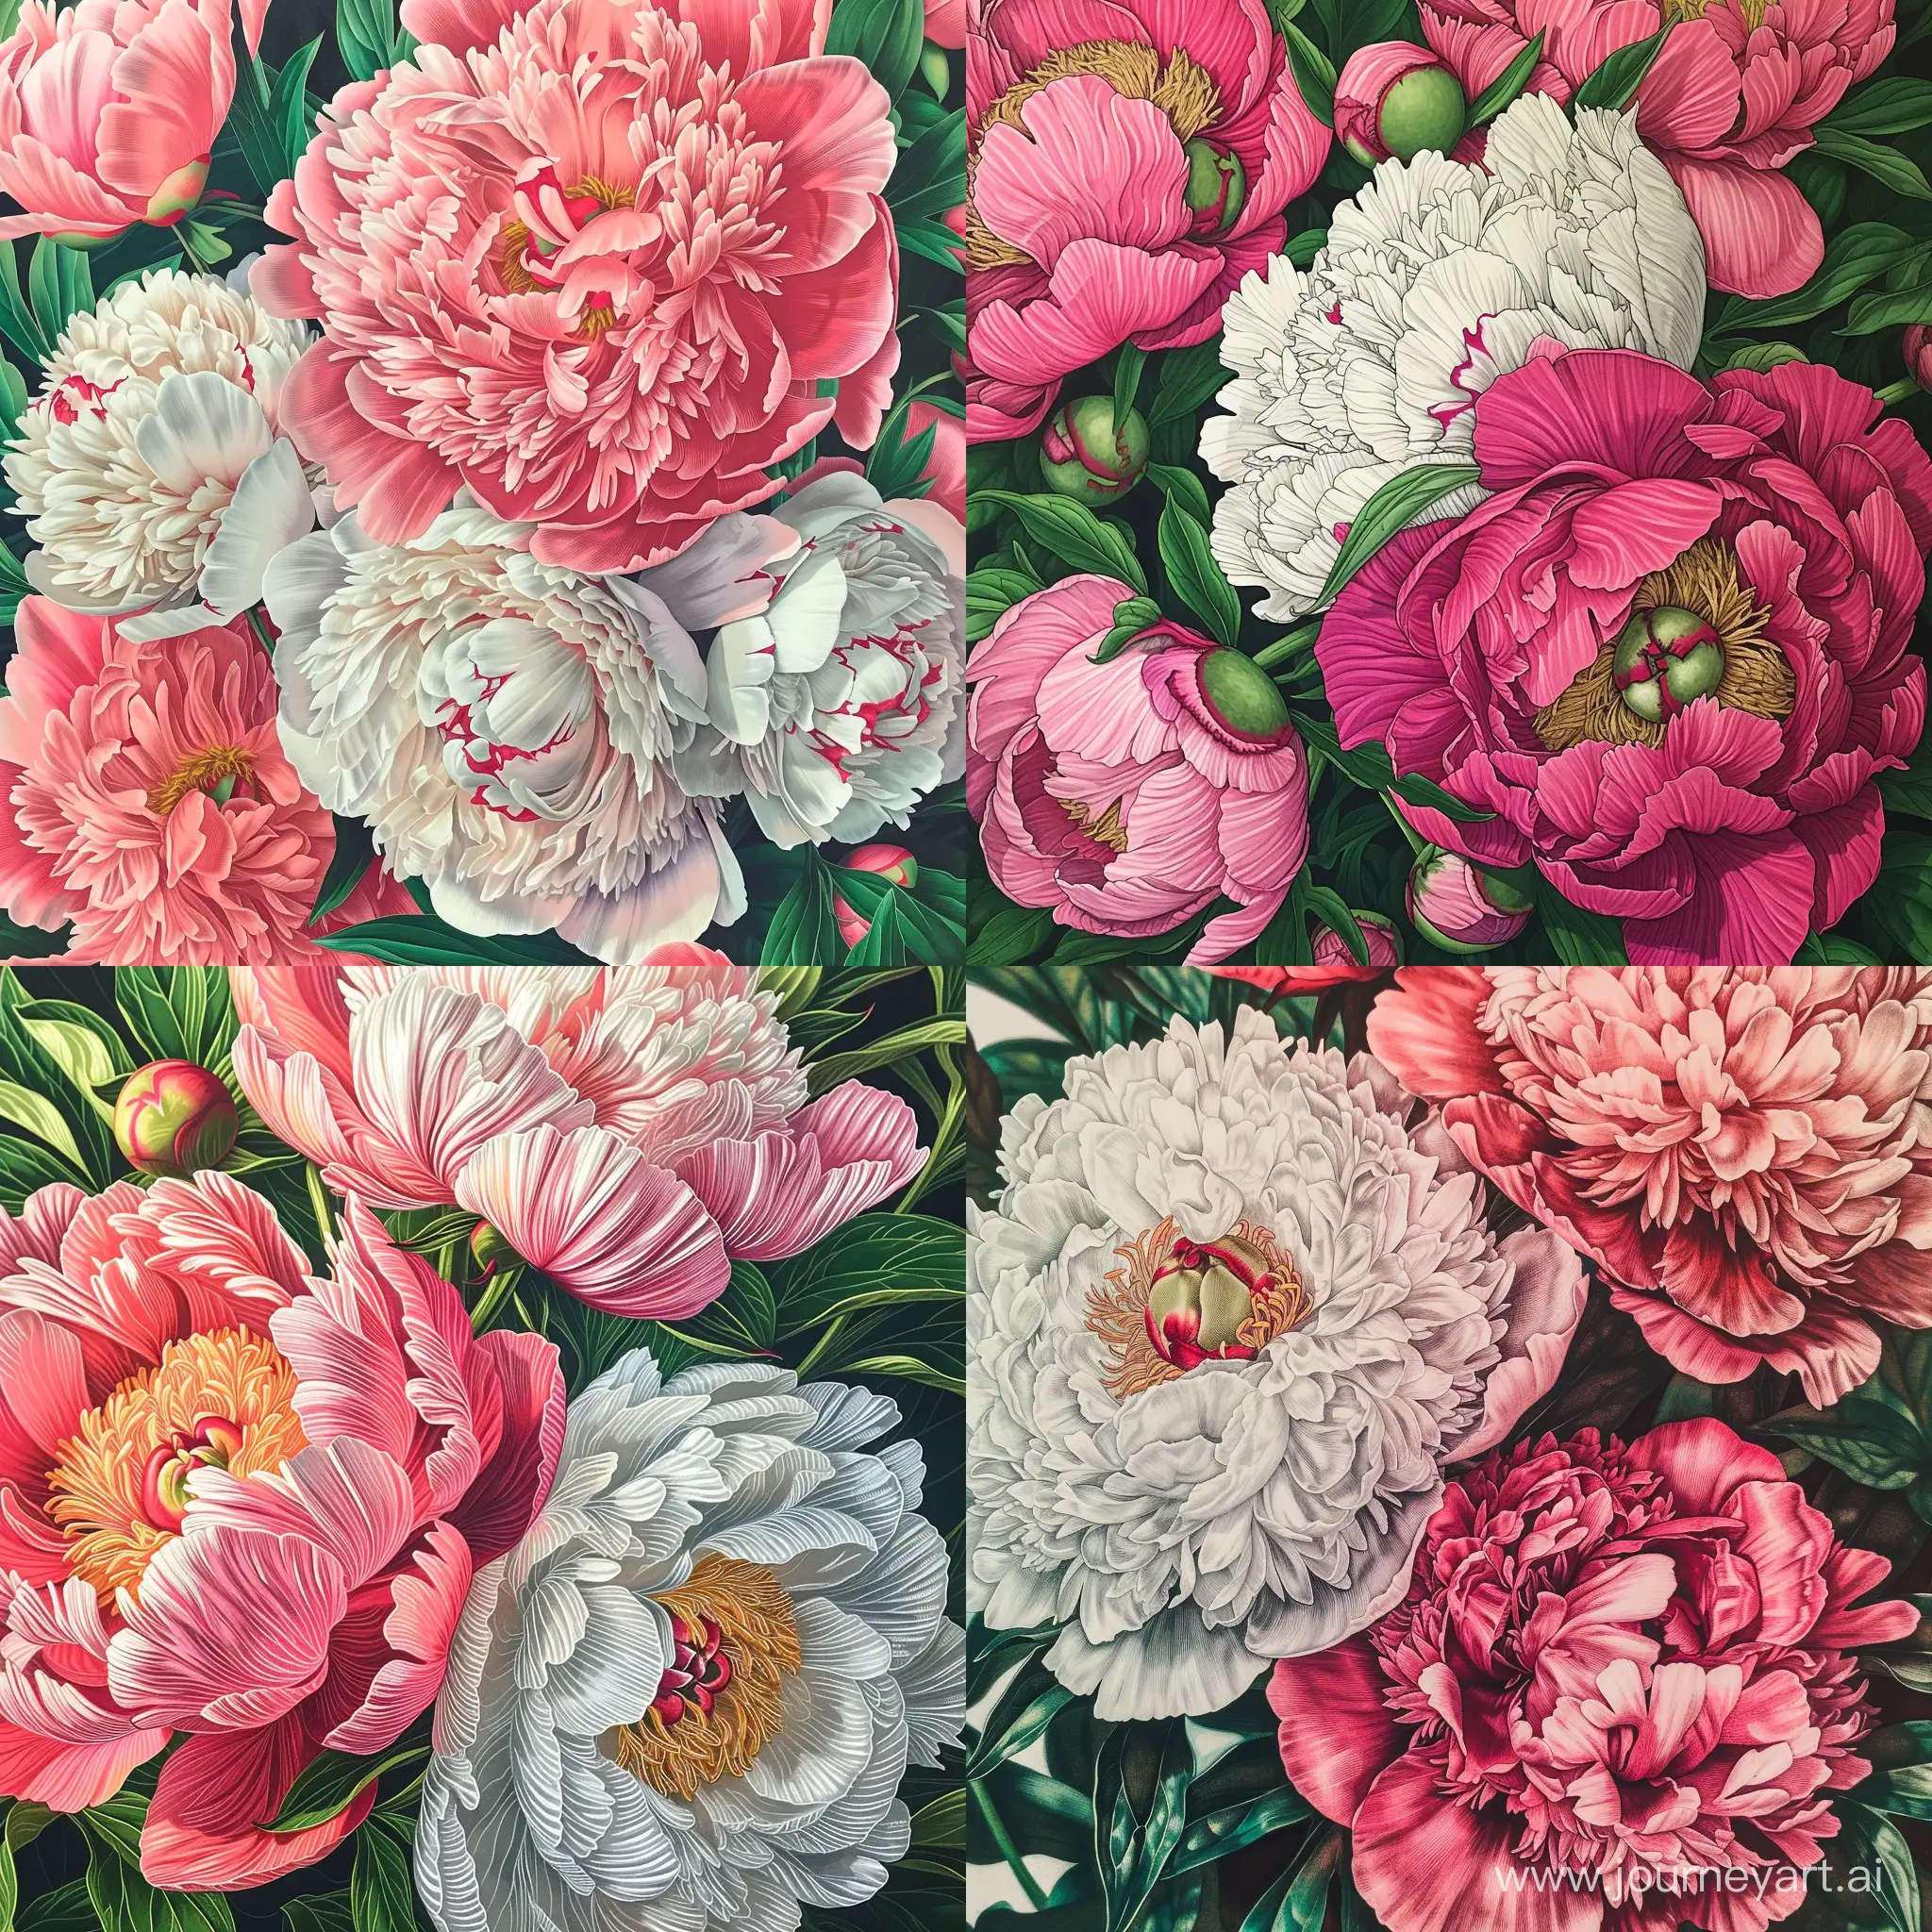 a vibrant and lively Risograph of peonies in full bloom. Highly intricate detailing, texture detail, 8k, The medium should be hyper-realistic drawing, with a style reminiscent of Georgia O'Keeffe's floral paintings. The lighting should be bright and direct, highlighting the intricate details and vivid colors of the flowers. The colors should be a vibrant palette of pinks, whites, and greens, with a focus on the contrast between the flowers and the background.